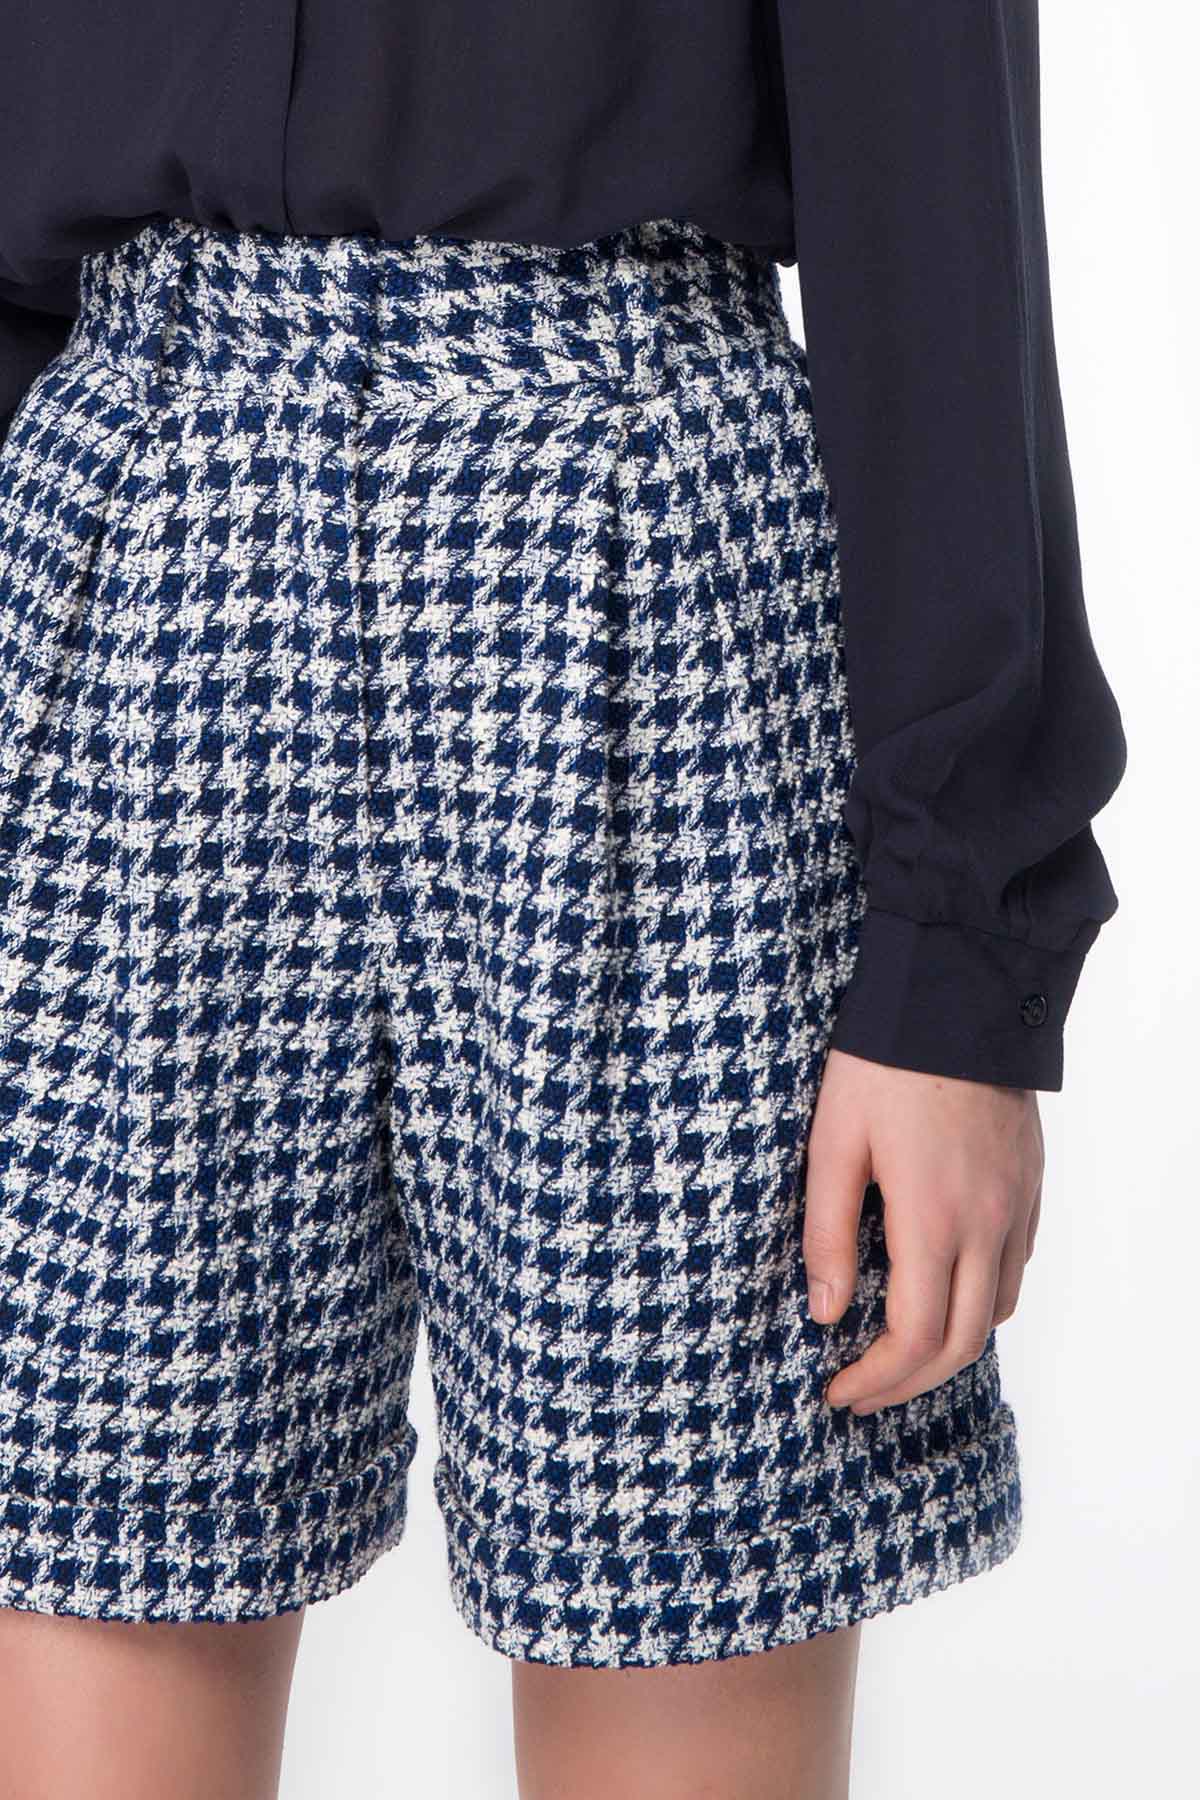 Shorts with blue&white houndstooth print, photo 12